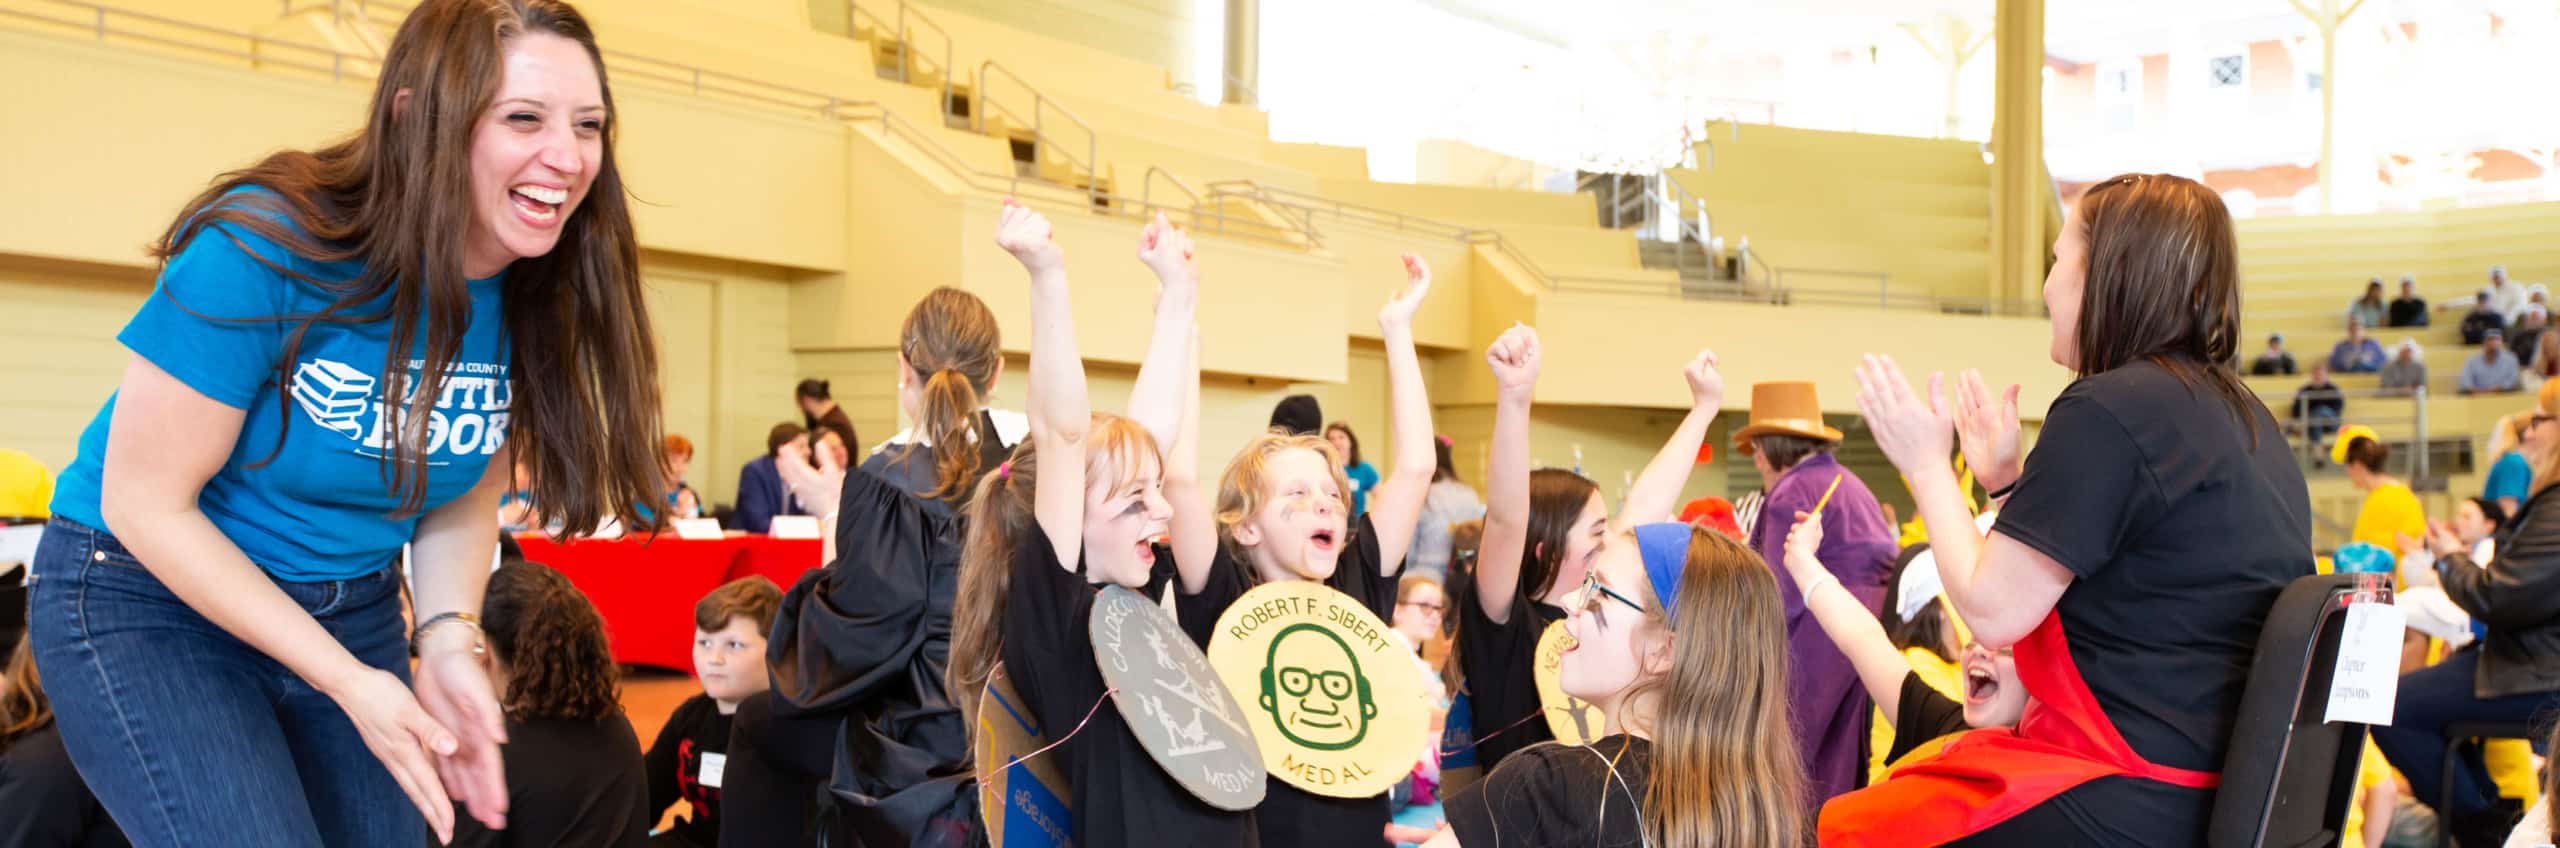 Children cheering during the Battle of the Books event in the amphitheater